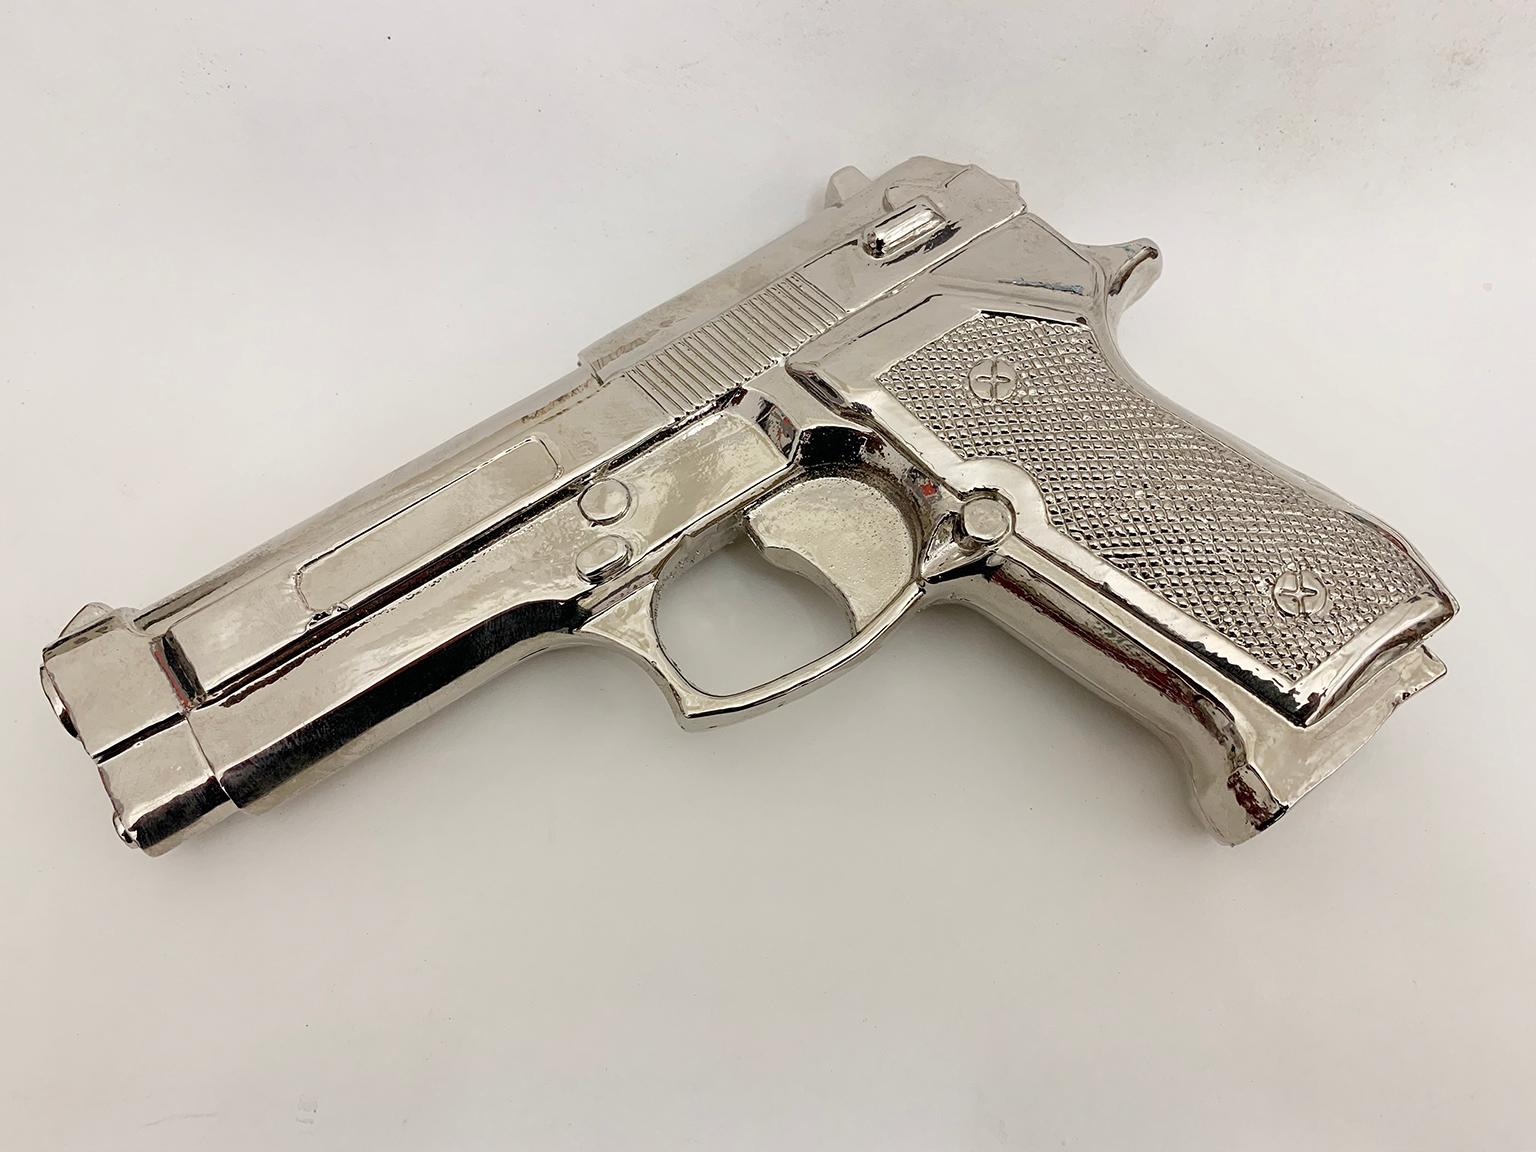 Fake Gun (Beretta)
2017
8” x 5.25” x 1.5” inches 
Cast resin and nickel plating. Unique work.

This sculpture is cast from a replica of the well-known handgun Beretta. It has been transformed into a new object of contemplation that confronts the